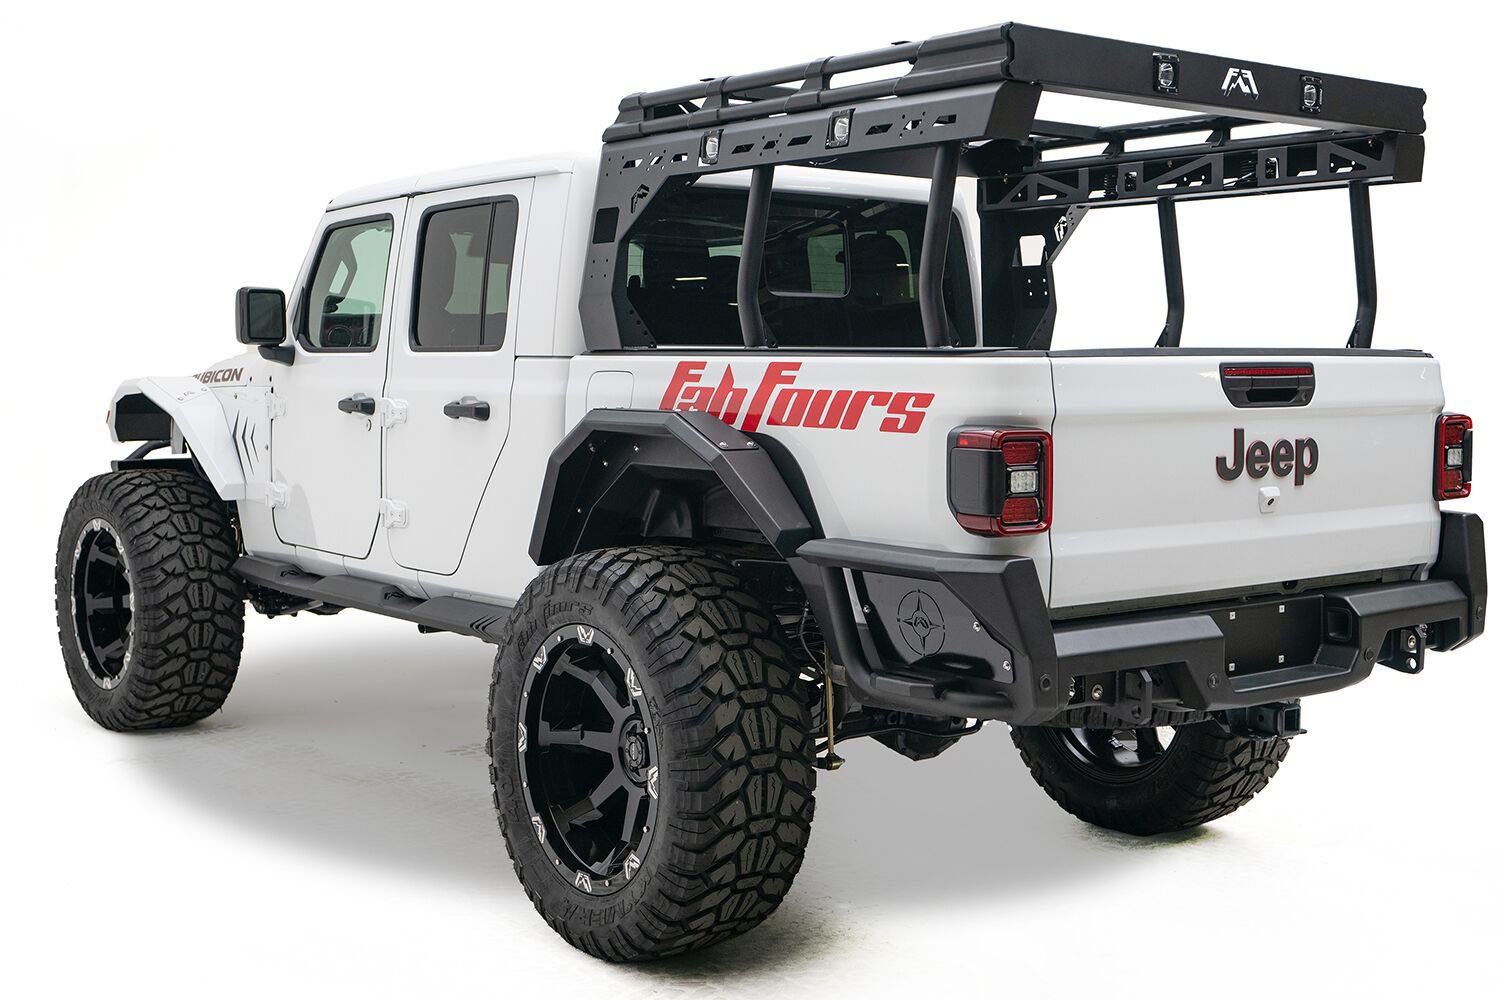 Truck Bed Rack For Jeep Gladiator